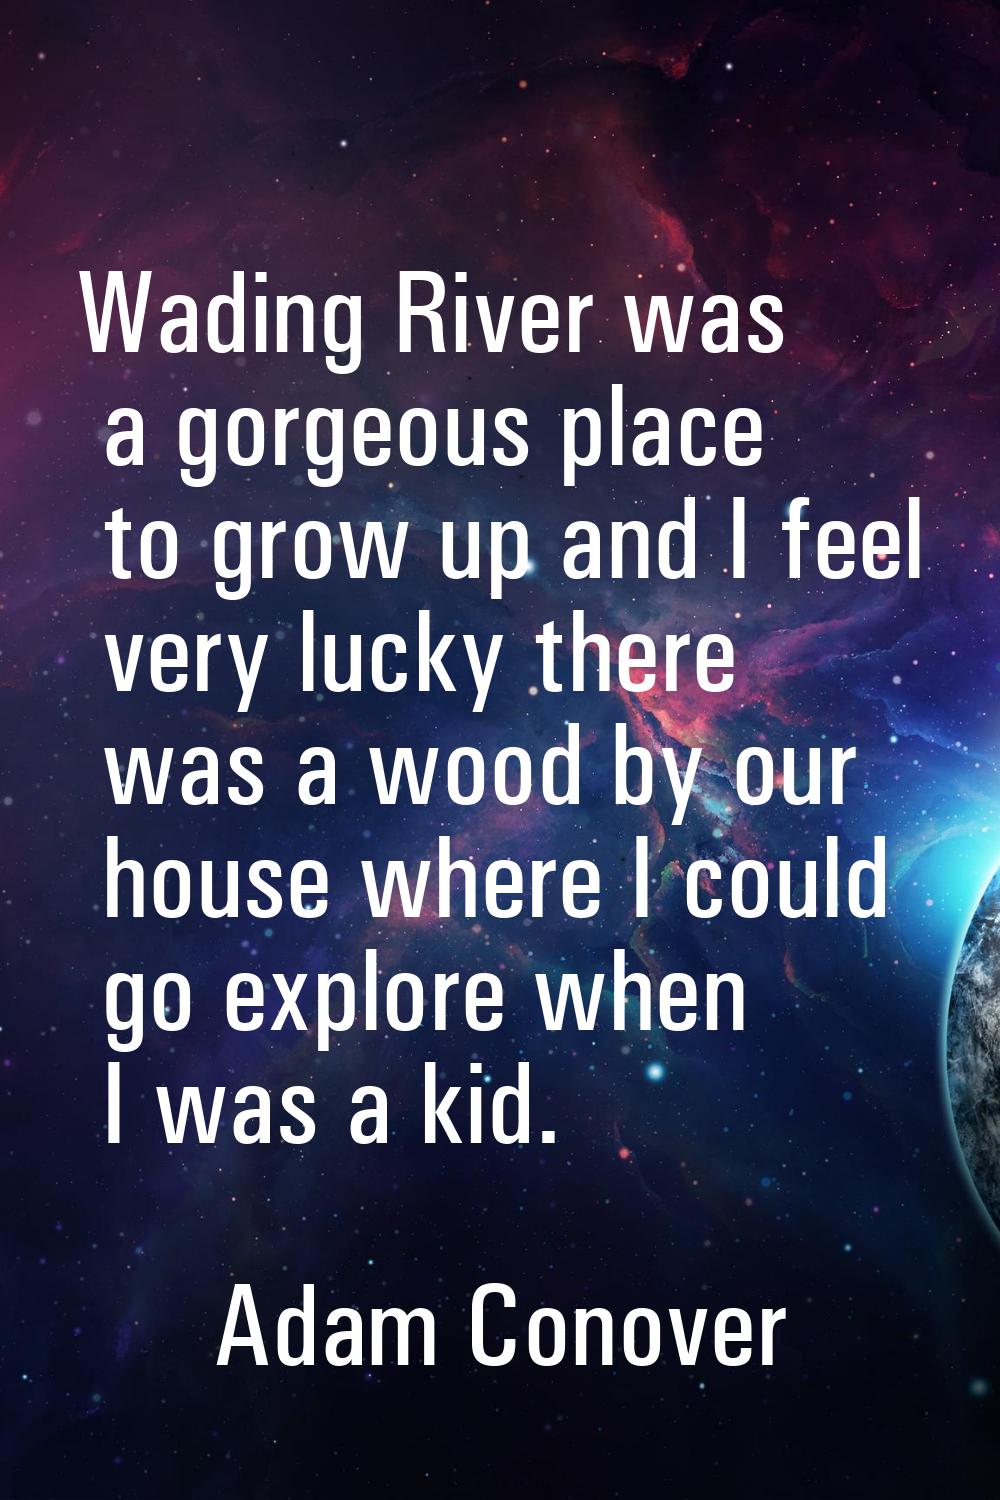 Wading River was a gorgeous place to grow up and I feel very lucky there was a wood by our house wh